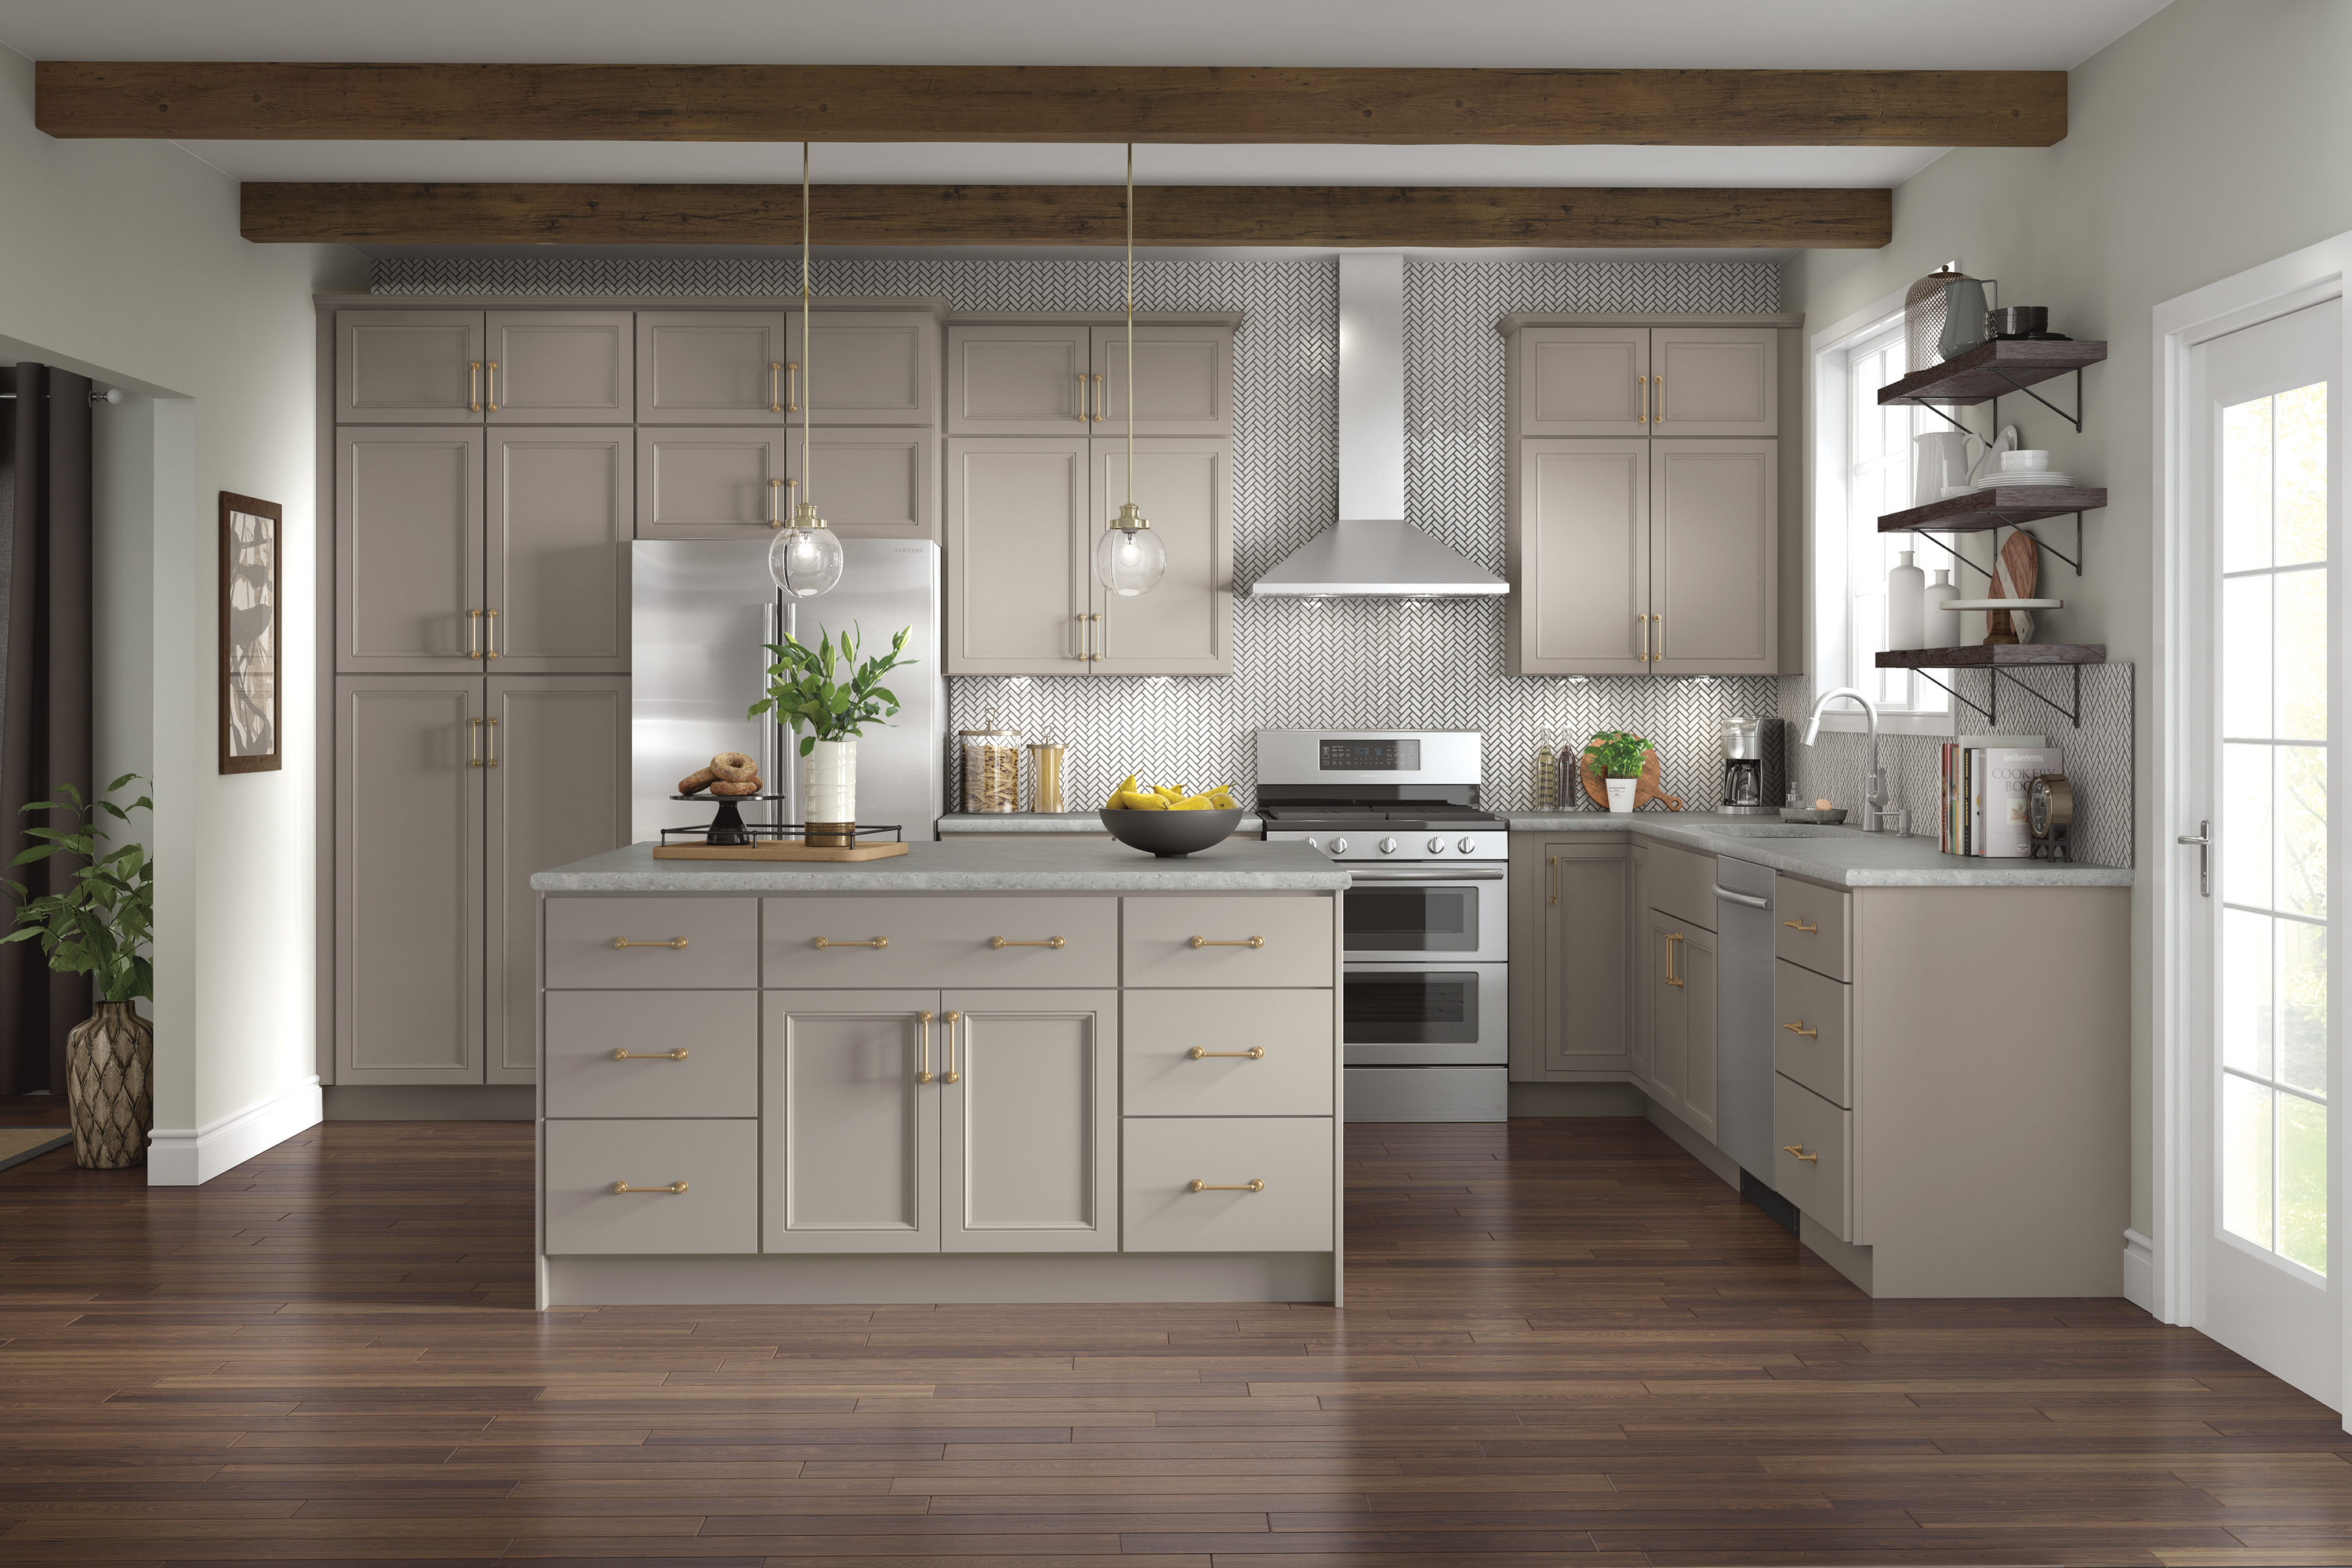 Diamond Cabinets Specifications | Cabinets Matttroy